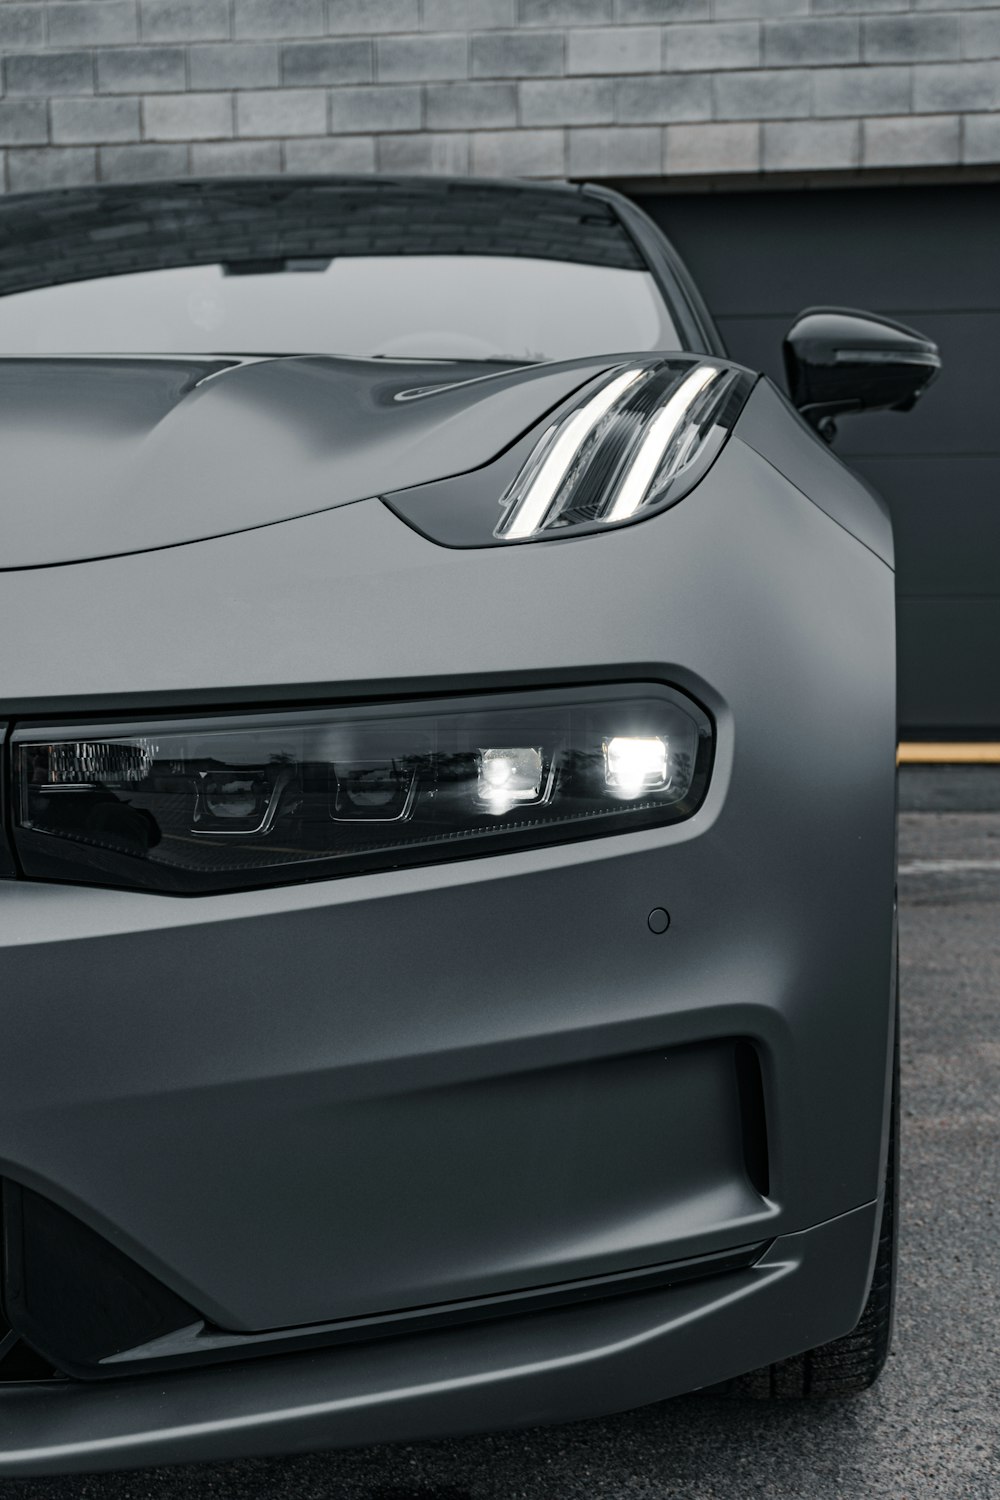 the front end of a gray sports car